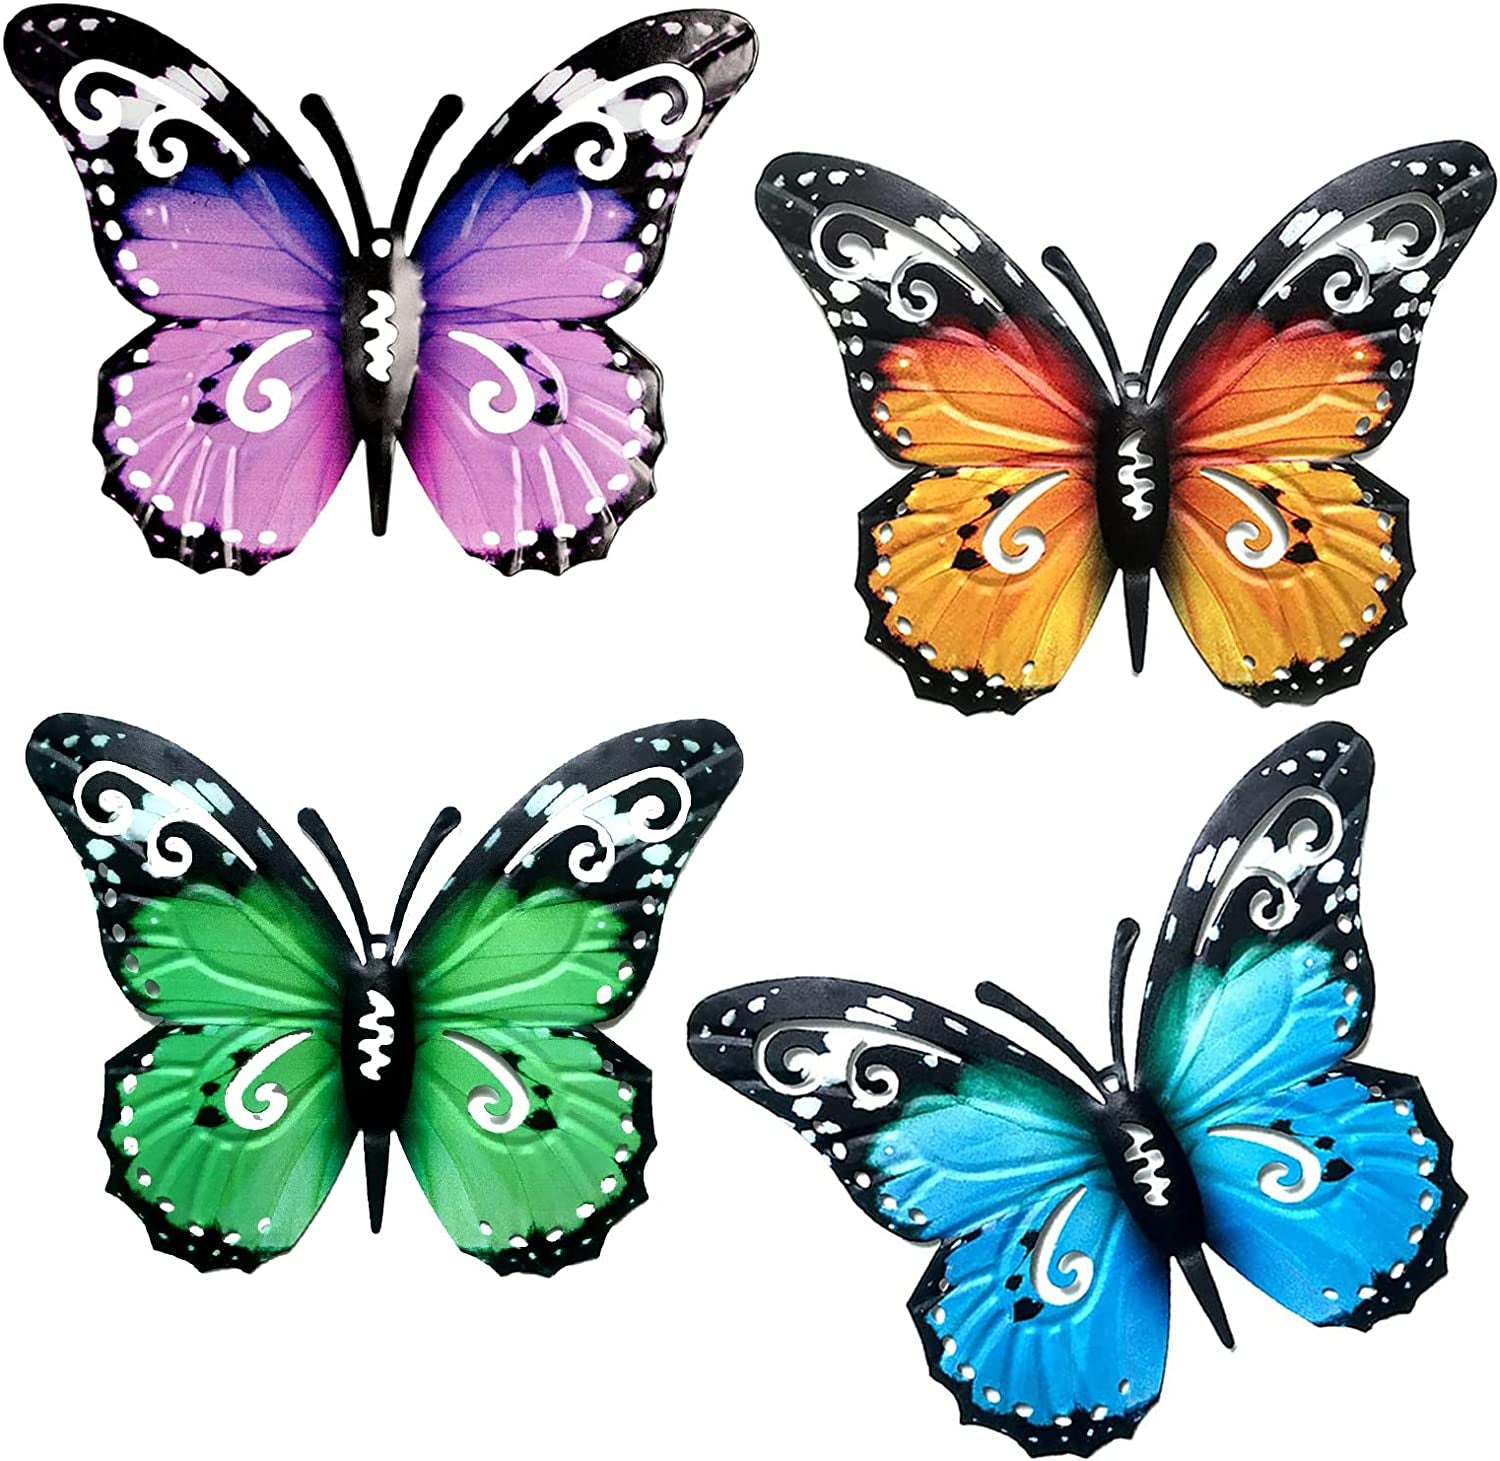 TGAHTMI, Garden Butterfly Ornaments Large Metal Garden Fence Decorations Butterfly Wall Art Decorations Outdoor Decor for Home Yard, Fence, Garden,Sheds Hanging (Blue + Yellow + Purple + Green)